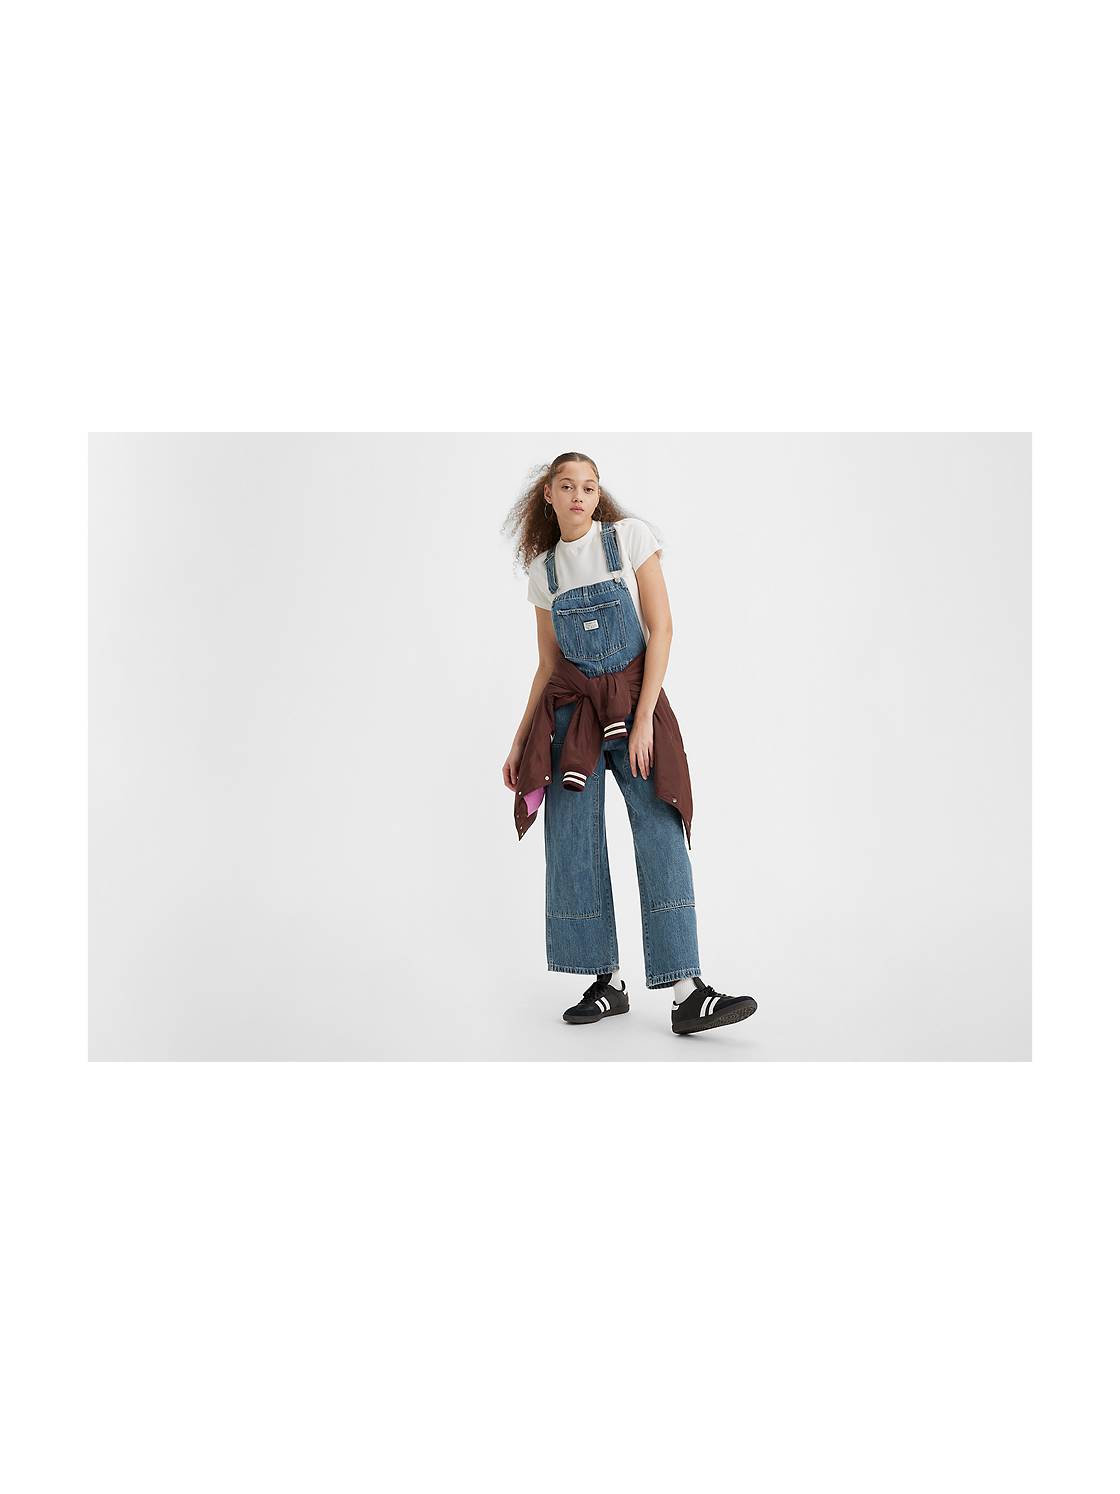 DSFEOIGY Denim Overalls for Women Casual Loose Wide Leg Dungarees